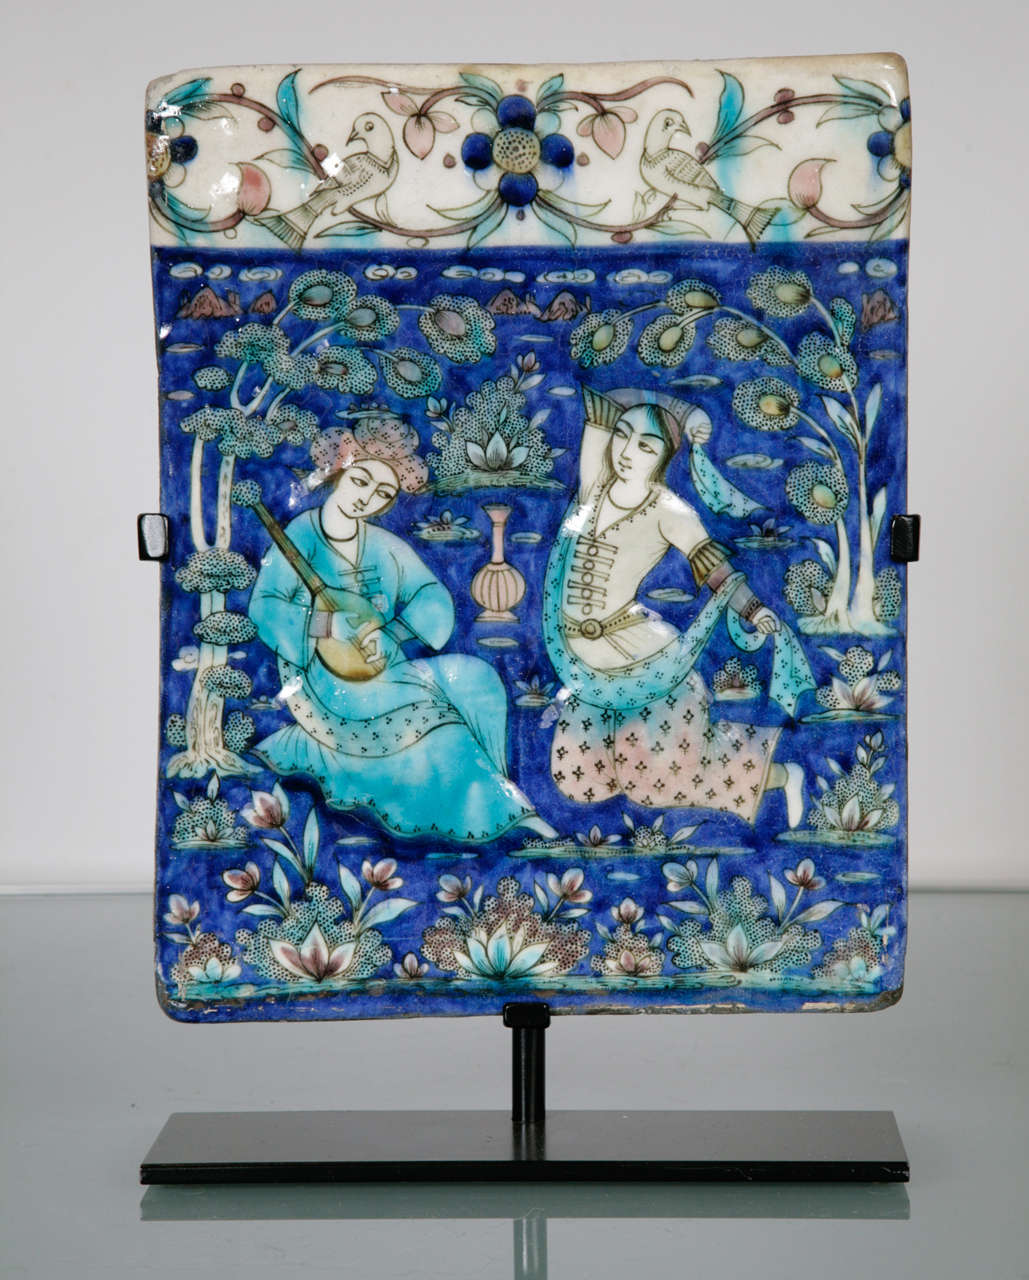 A rectangular polychrome tile depicting a romantic scene with a prince drinking and playing music with a companion. The companion dances with her scarf. Depicted with decorative border and floral landscape.